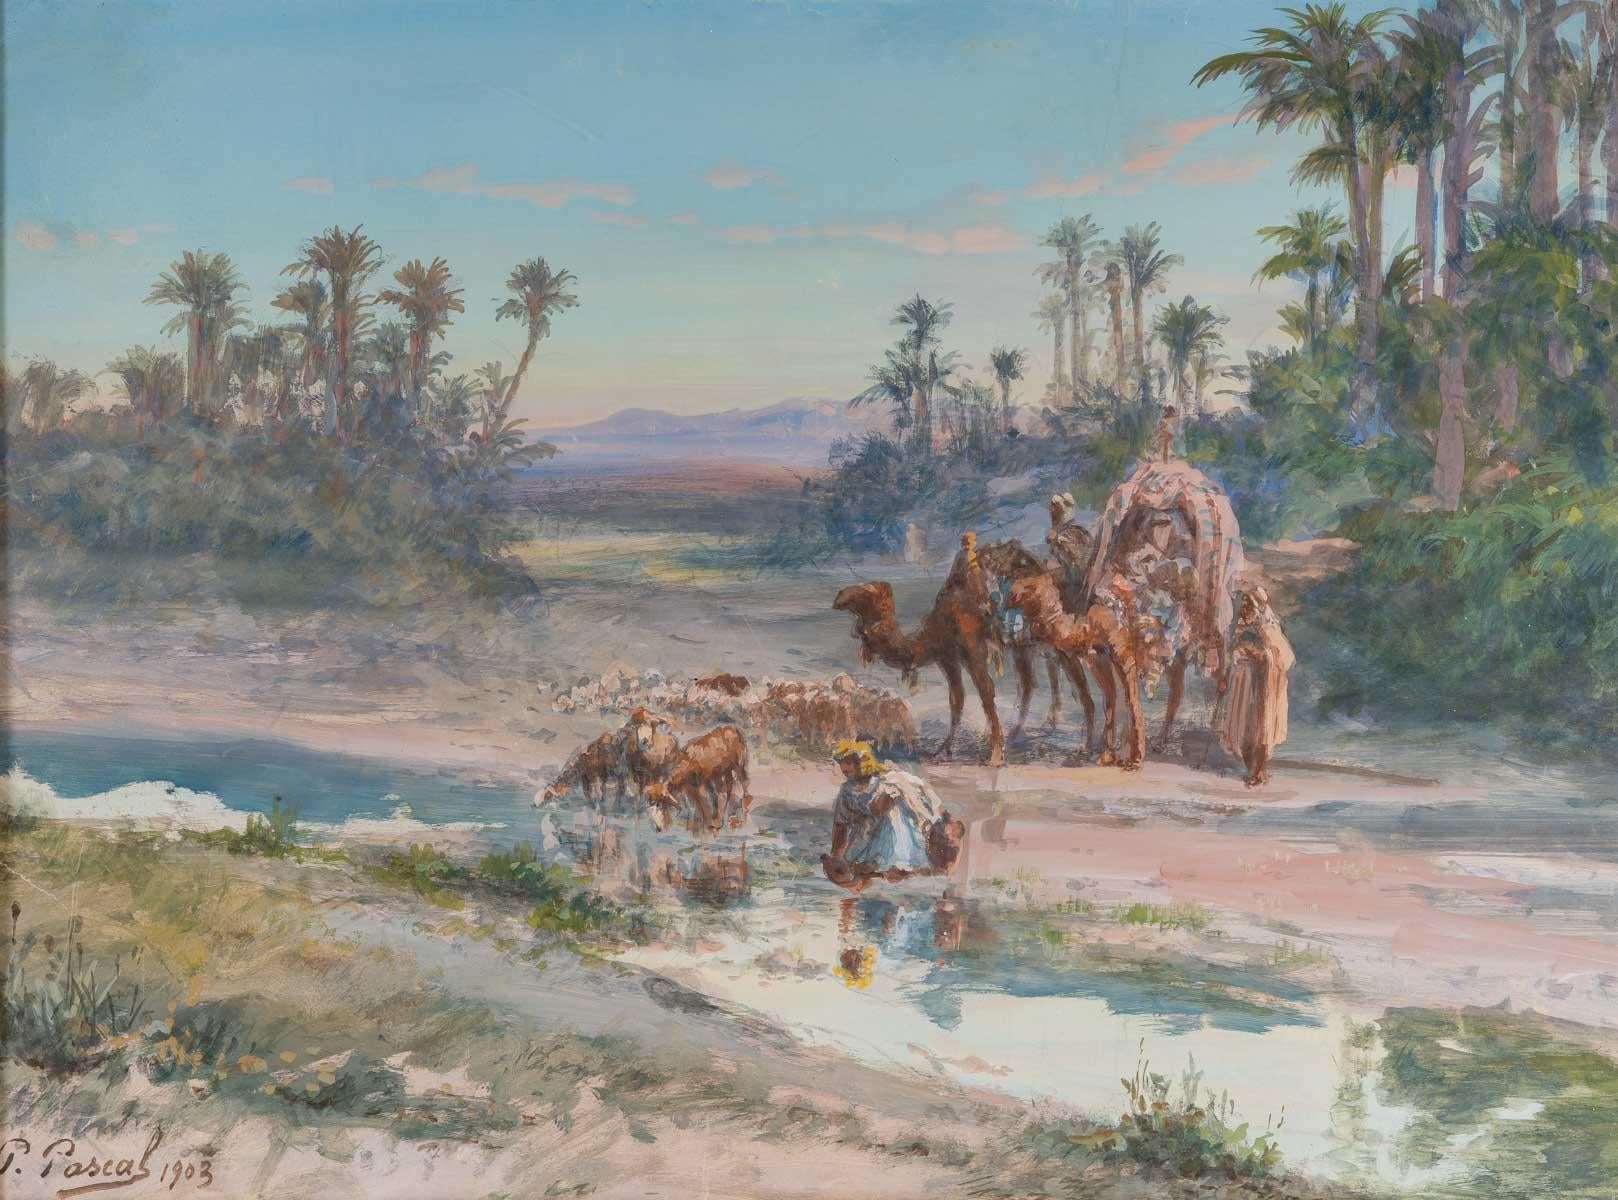 Break at The oasis - Gouache 1903 - Academic Painting by Paul PASCAL